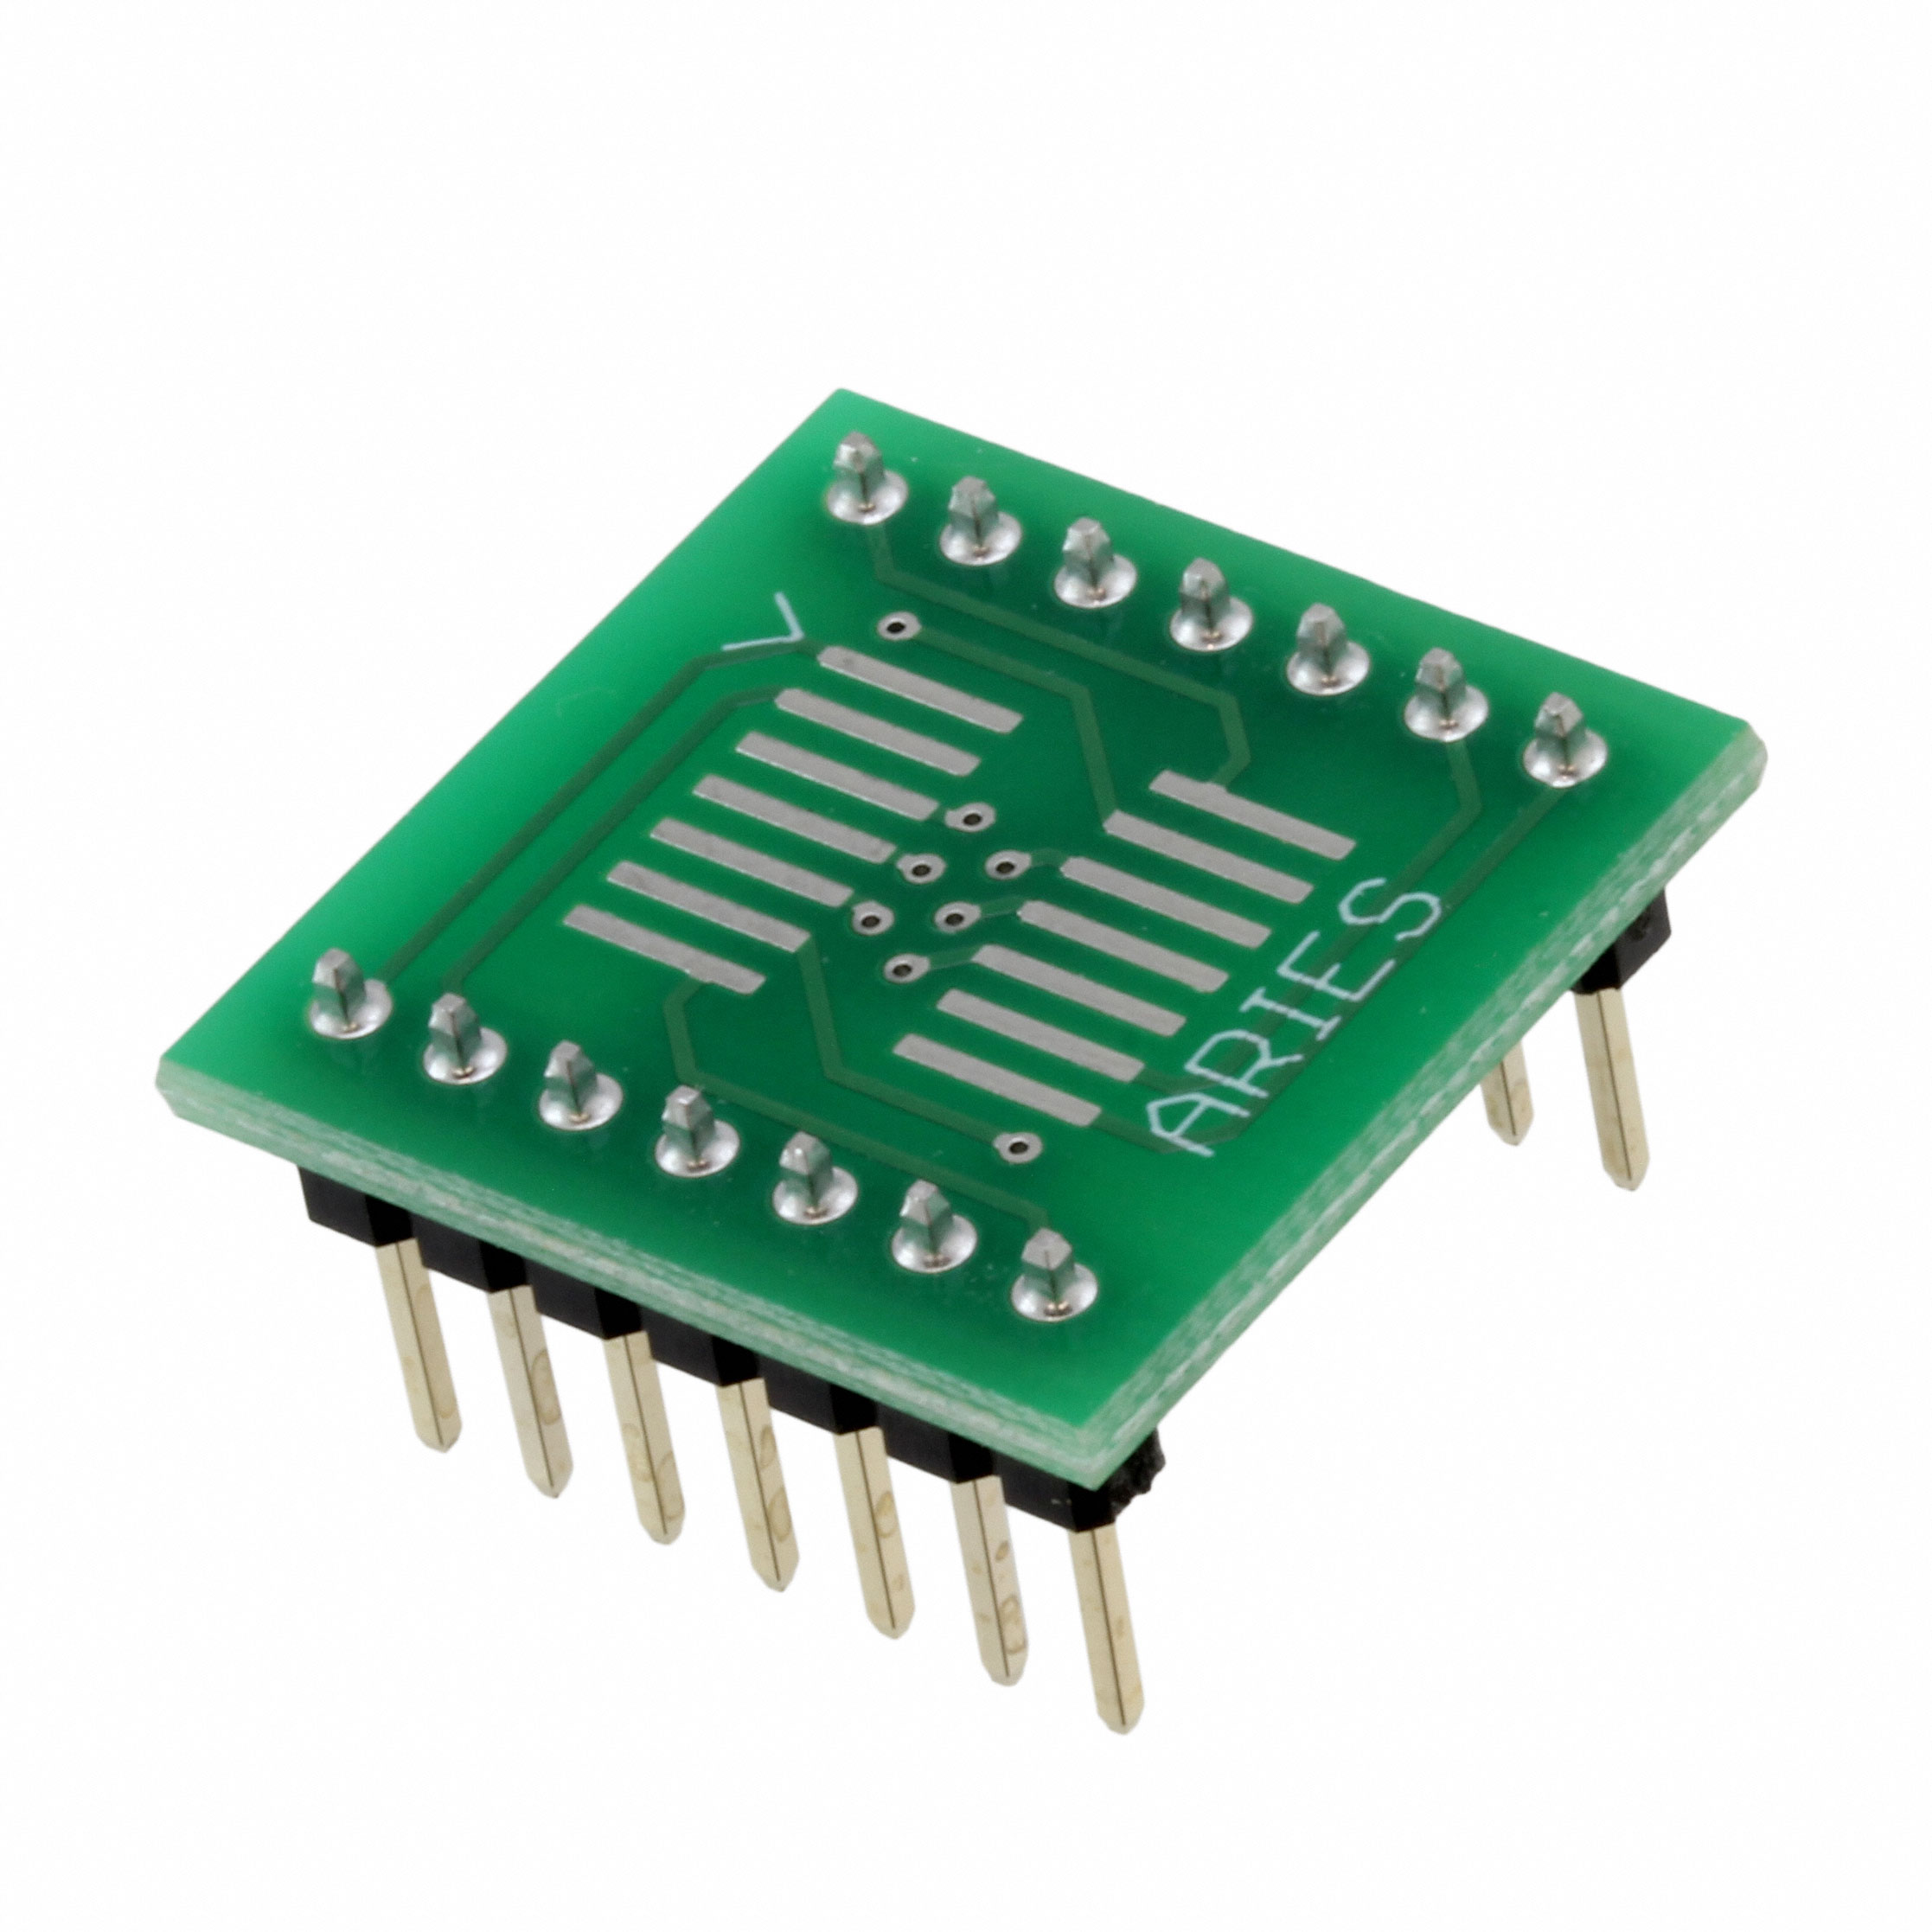 【LCQT-SOIC14】SOCKET ADAPTER SOIC TO 14DIP